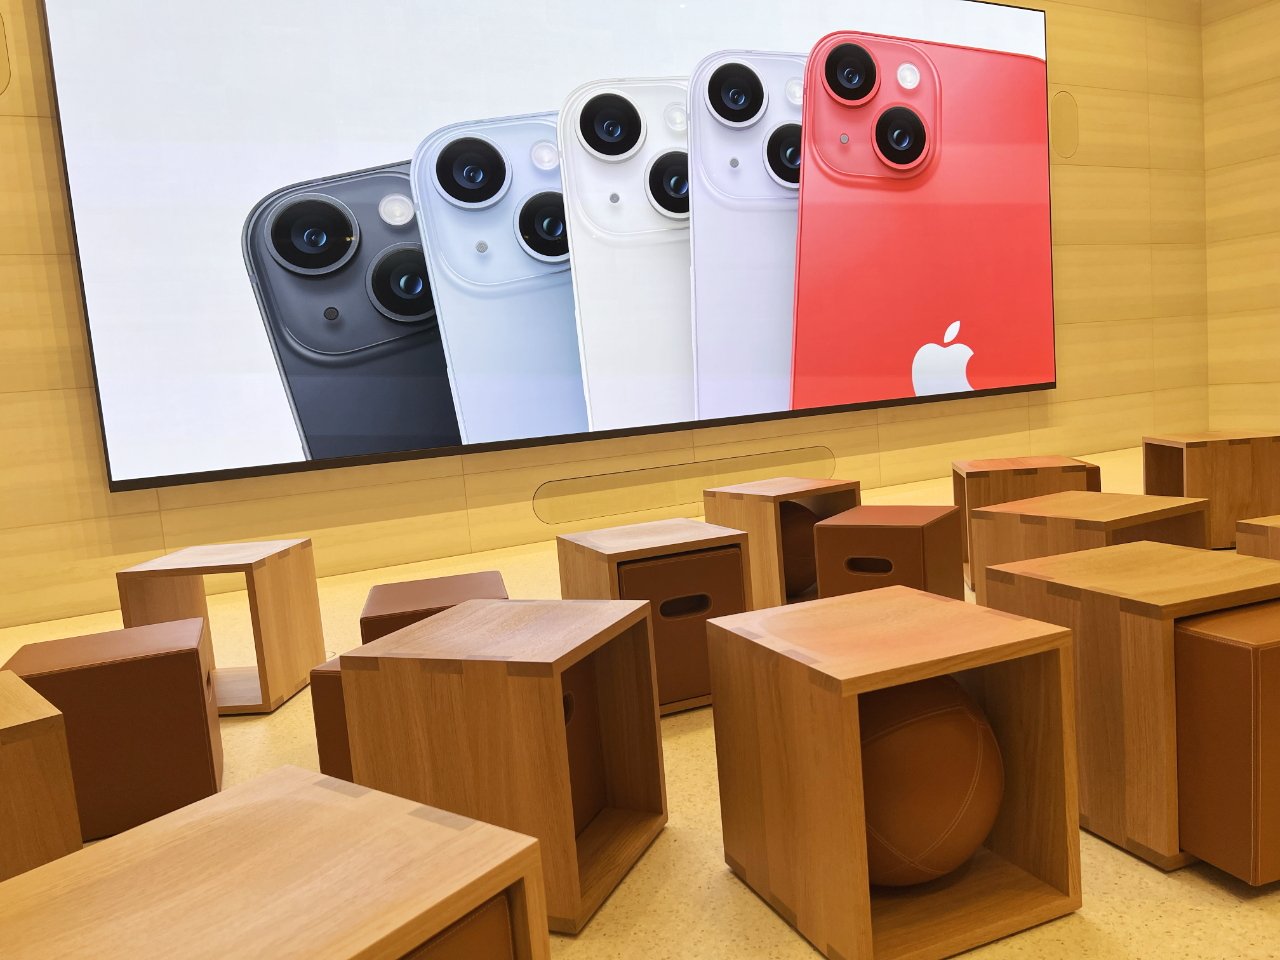 Forty wooden cubes with extra spaces in most of them in the Today at Apple section.